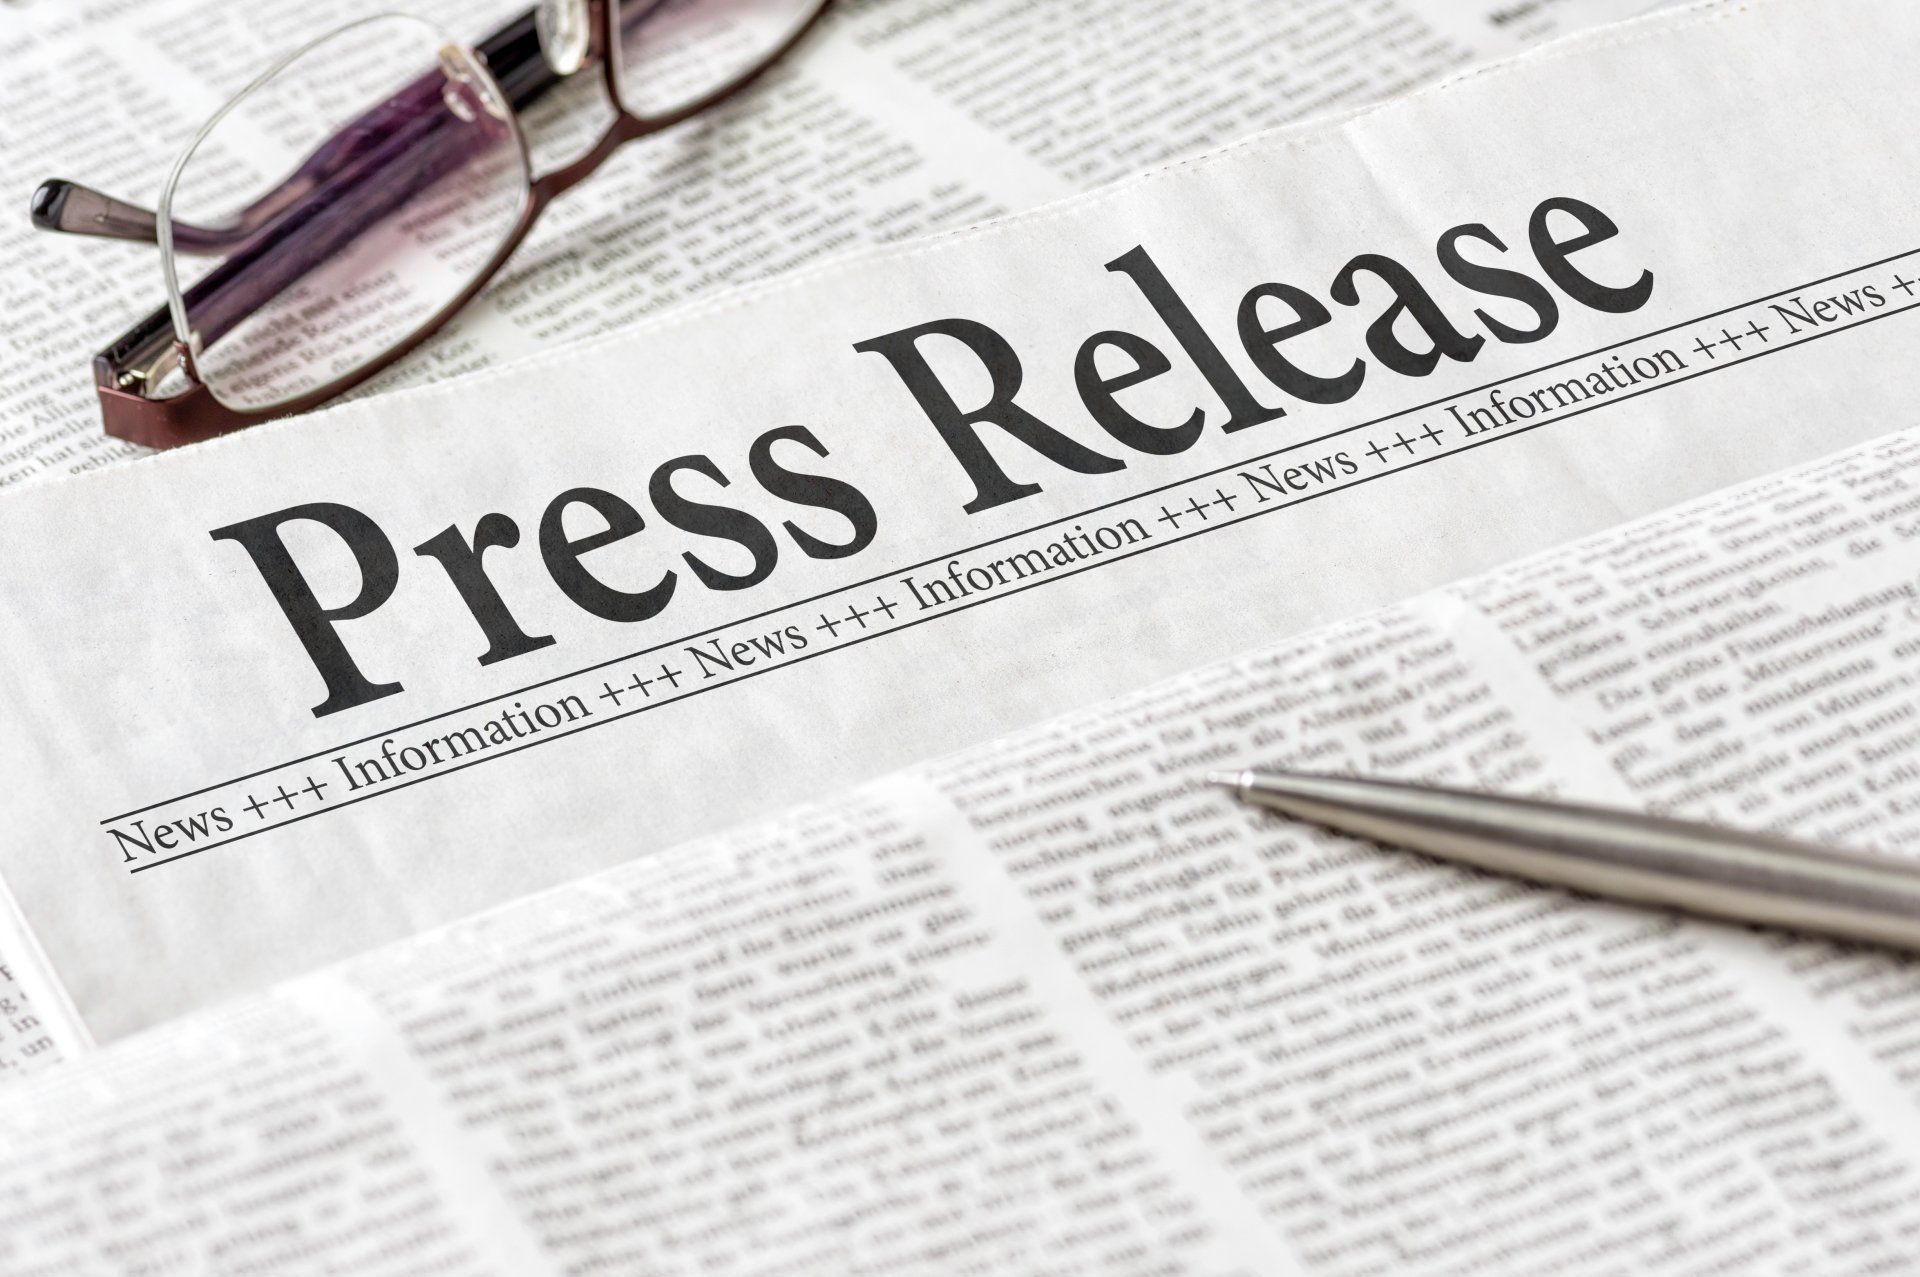 PRESS RELEASE WRITING & DISTRIBUTION